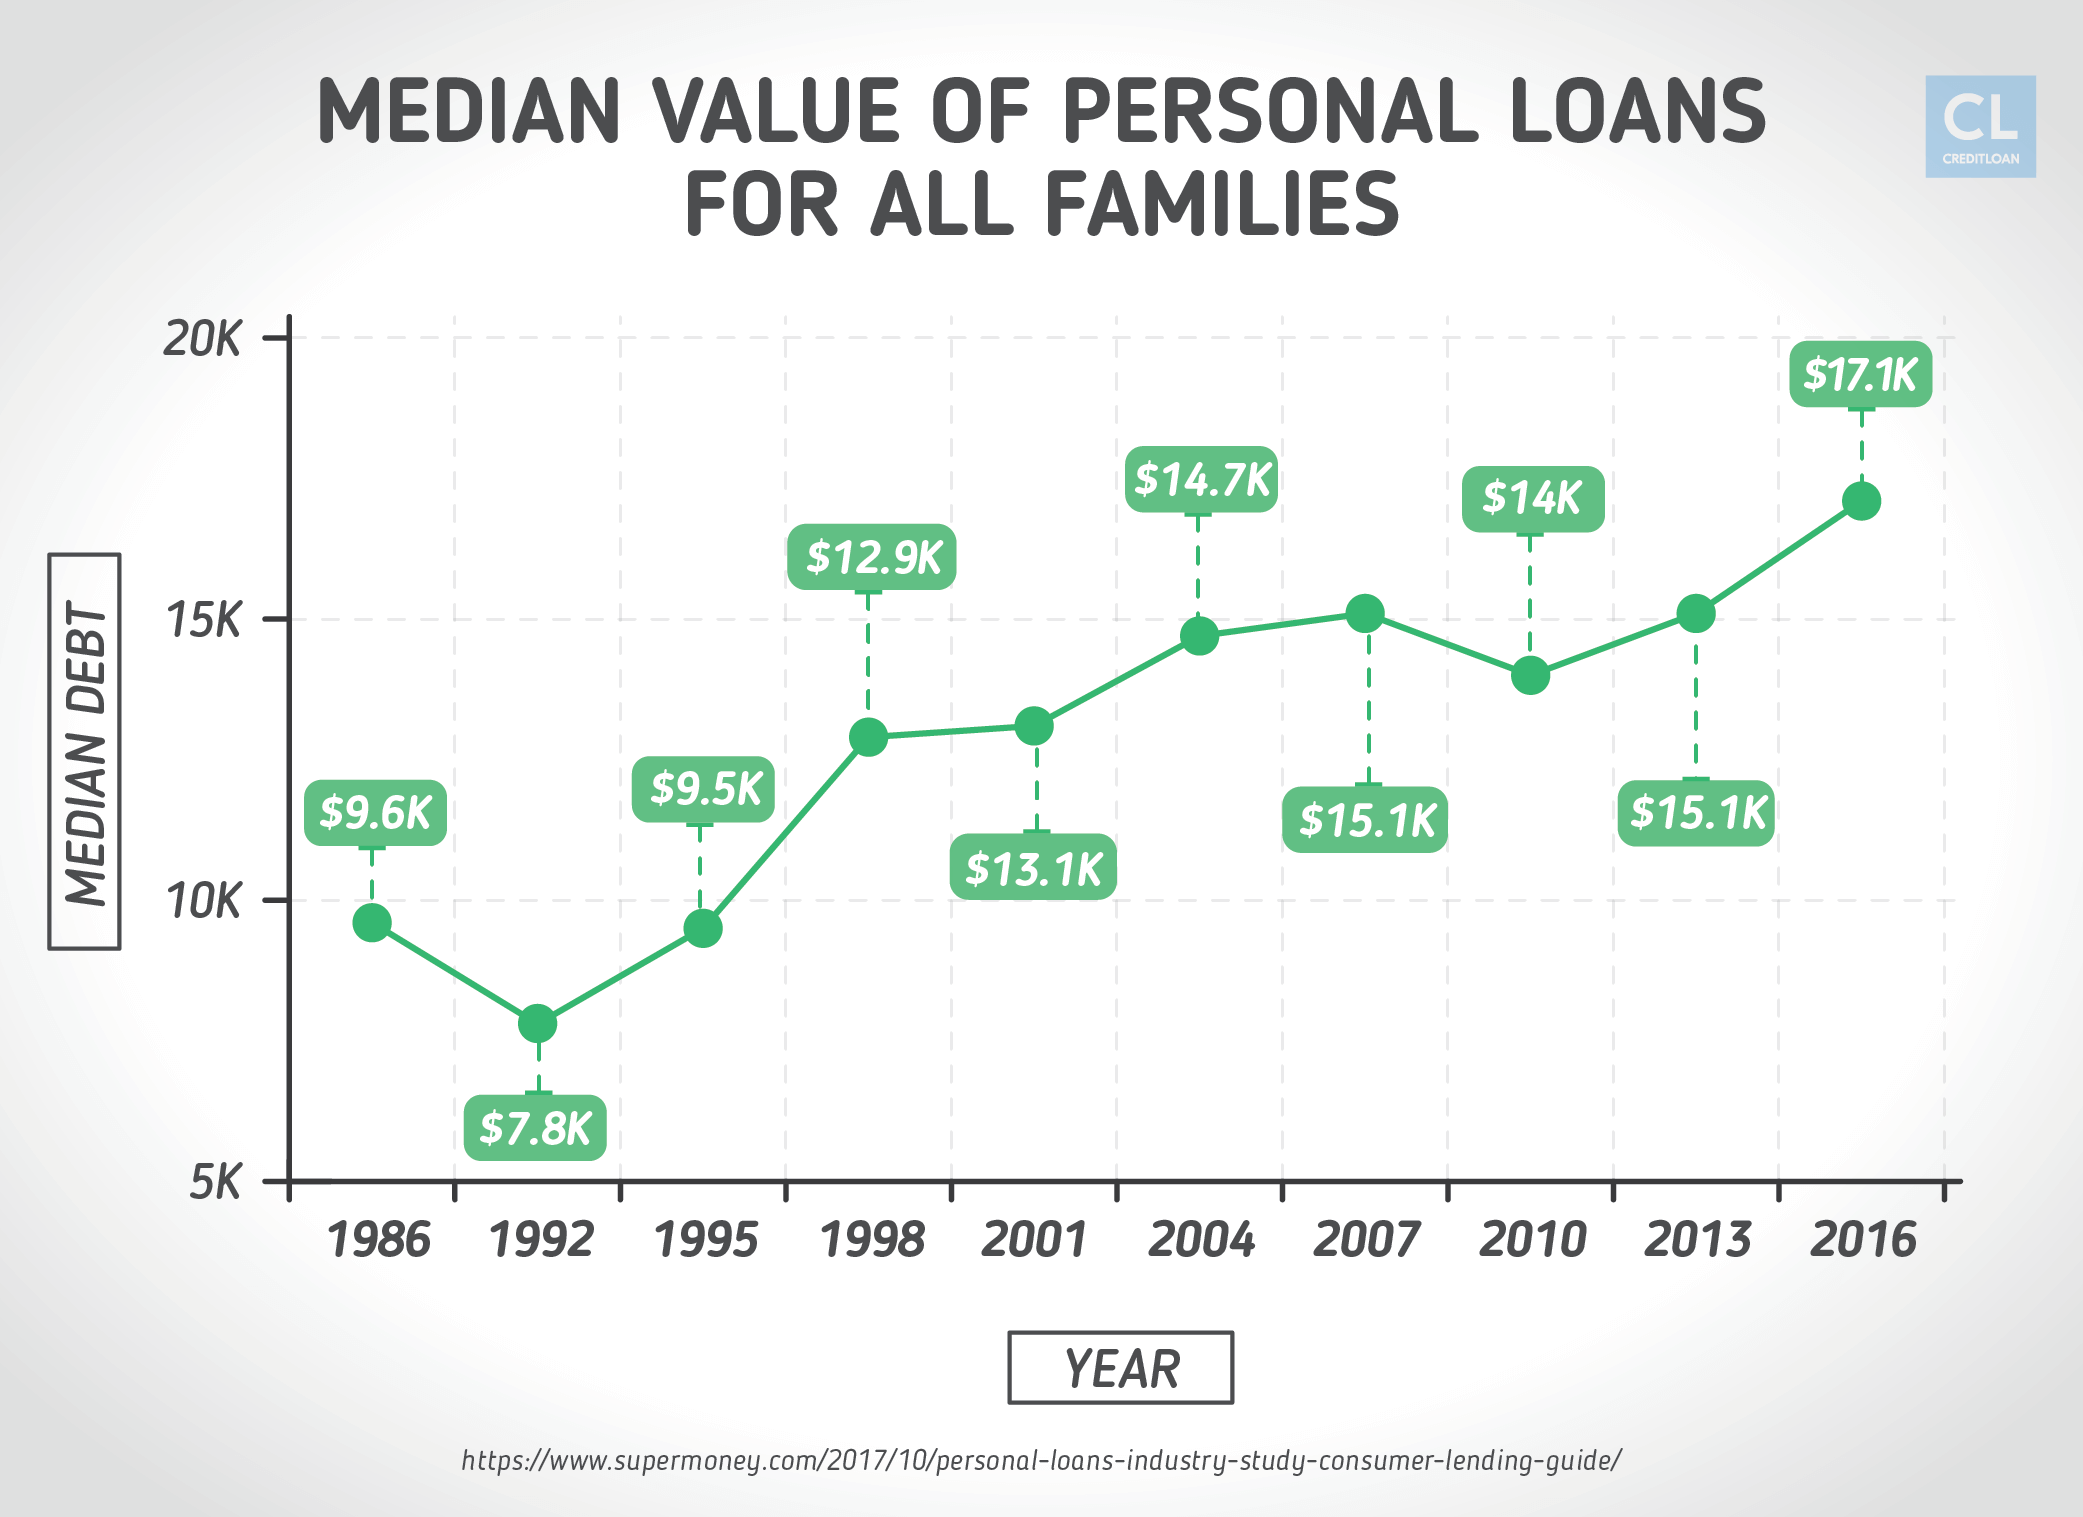 Median Value of Personal Loans 1986-2016